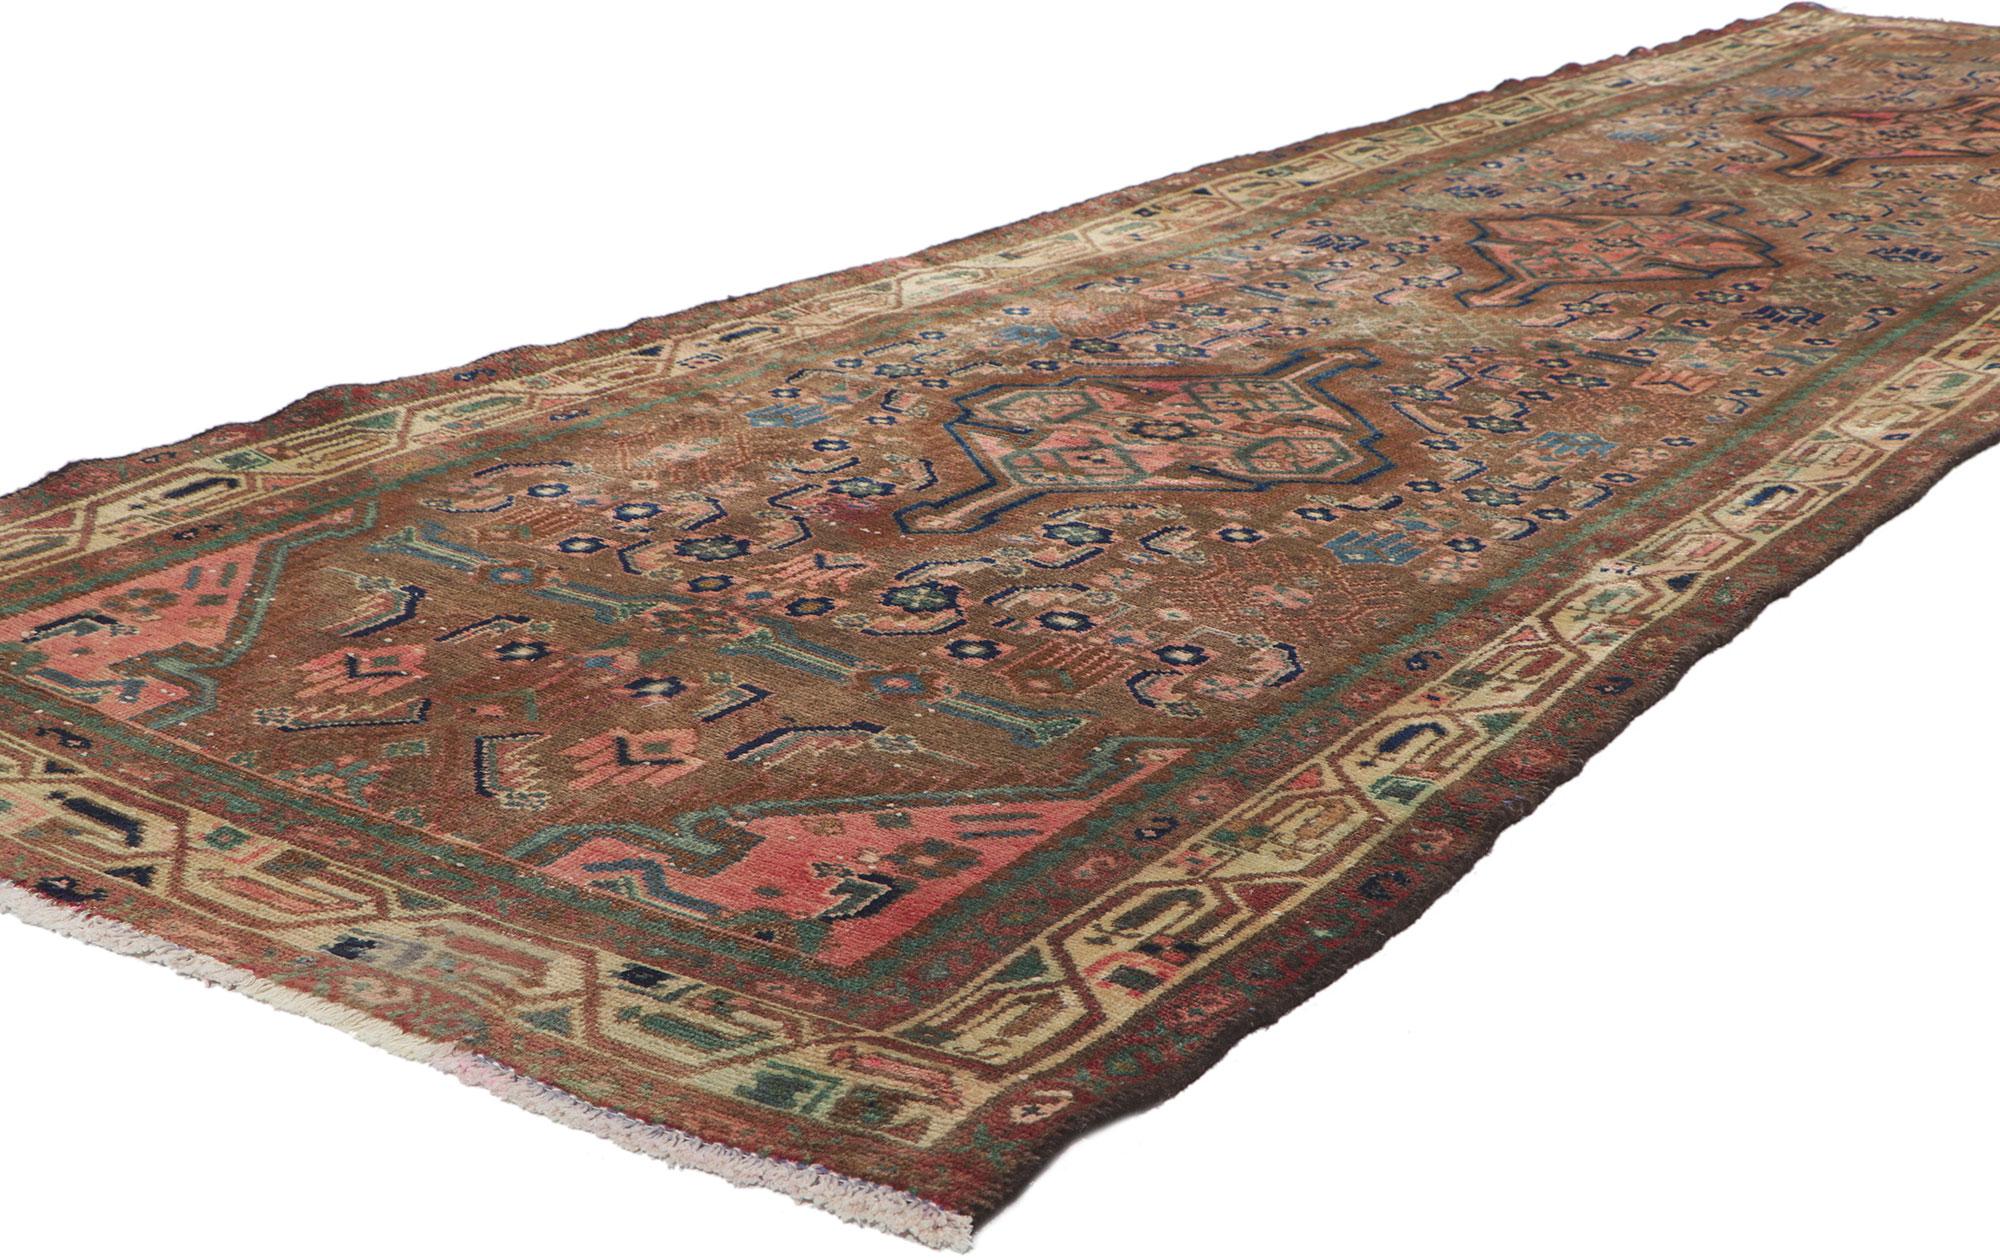 61173 Vintage Persian Hamadan Runner, 03'06 x 12'02. 
Full of tiny details and nomadic charm, this hand knotted wool vintage Persian Hamadan runner is a captivating vision of woven beauty. The tribal design and lively colorway woven into this rug